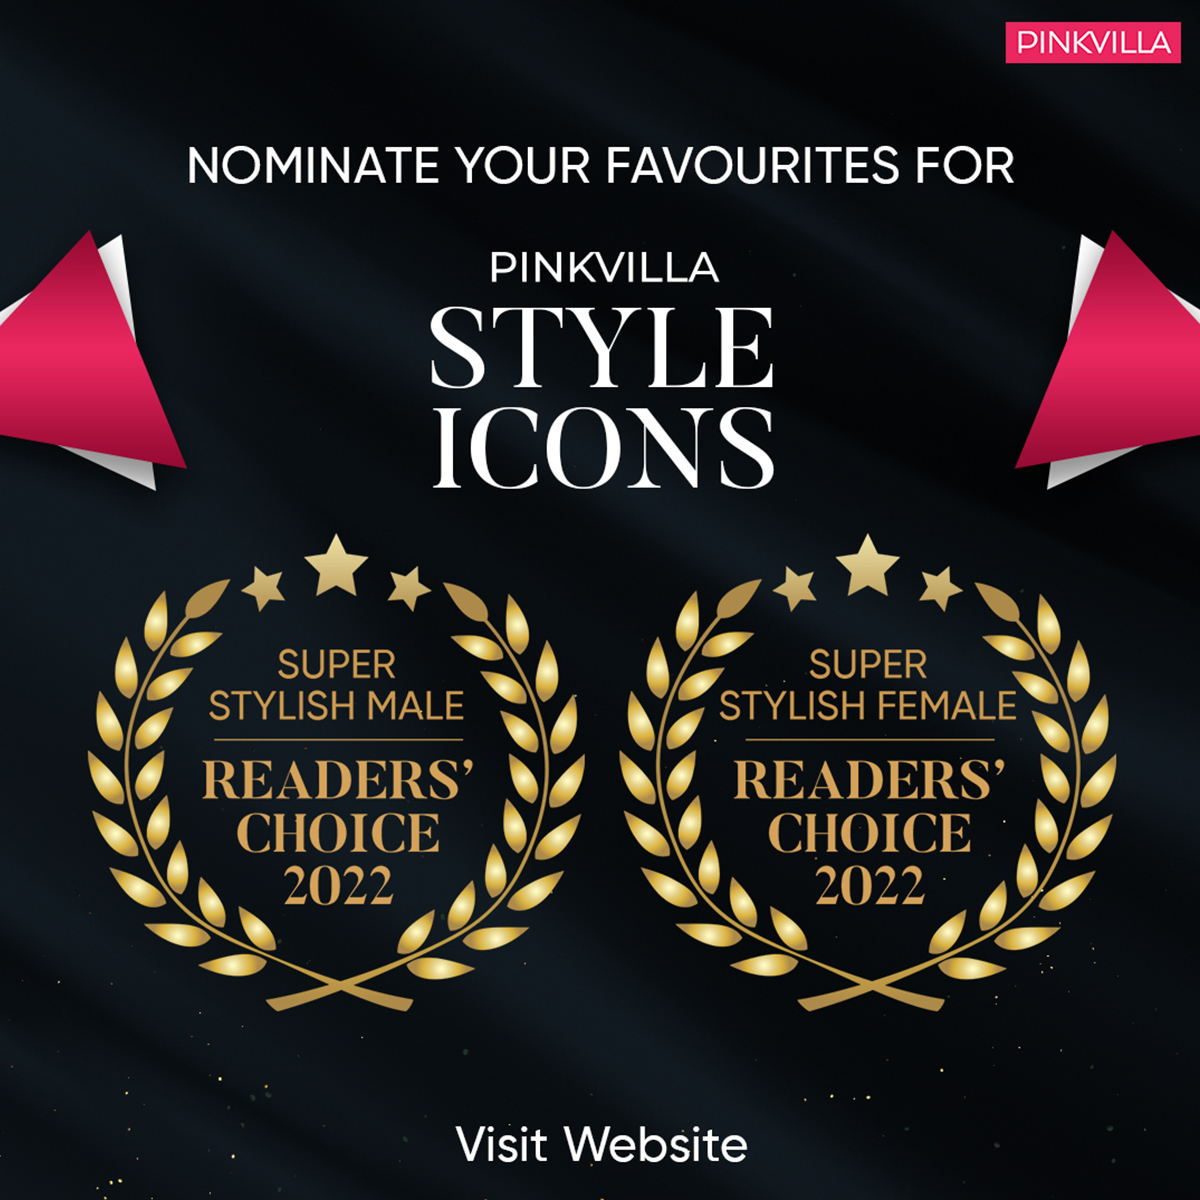 Pinkvilla Style Icons: Who amongst Bollywood stars is the 'Super Stylish' of them all? VOTE NOW